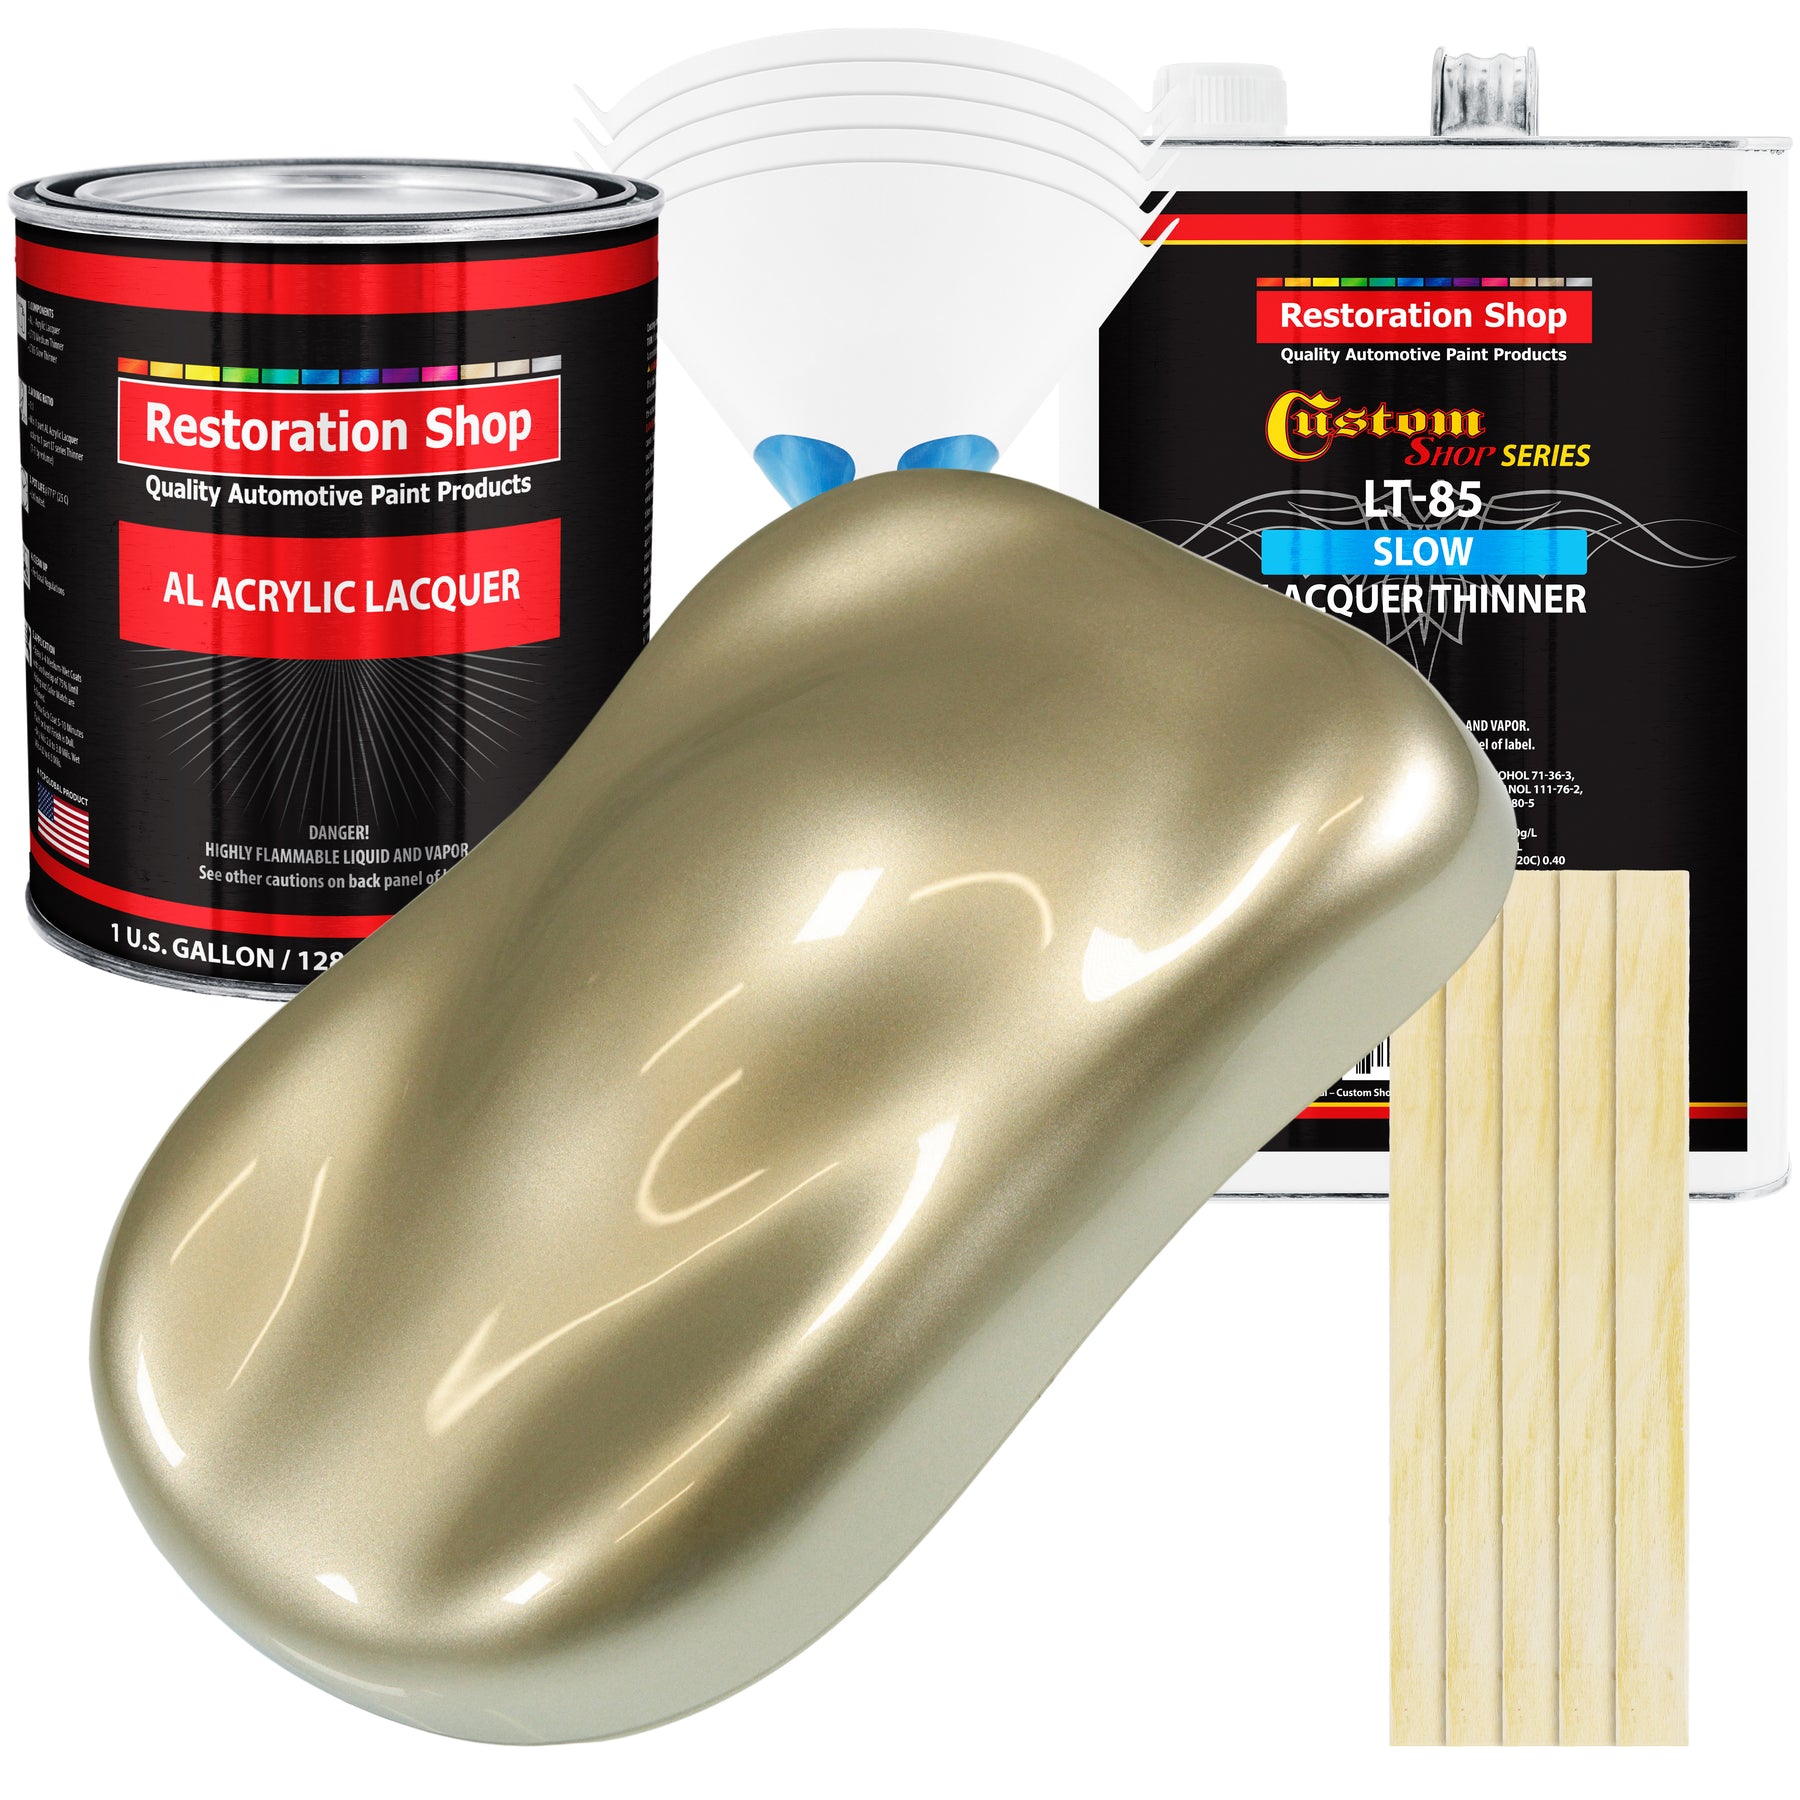 Restoration Shop - Boss 302 Yellow Acrylic Lacquer Auto Paint - Complete Gallon Paint Kit with Slow Thinner